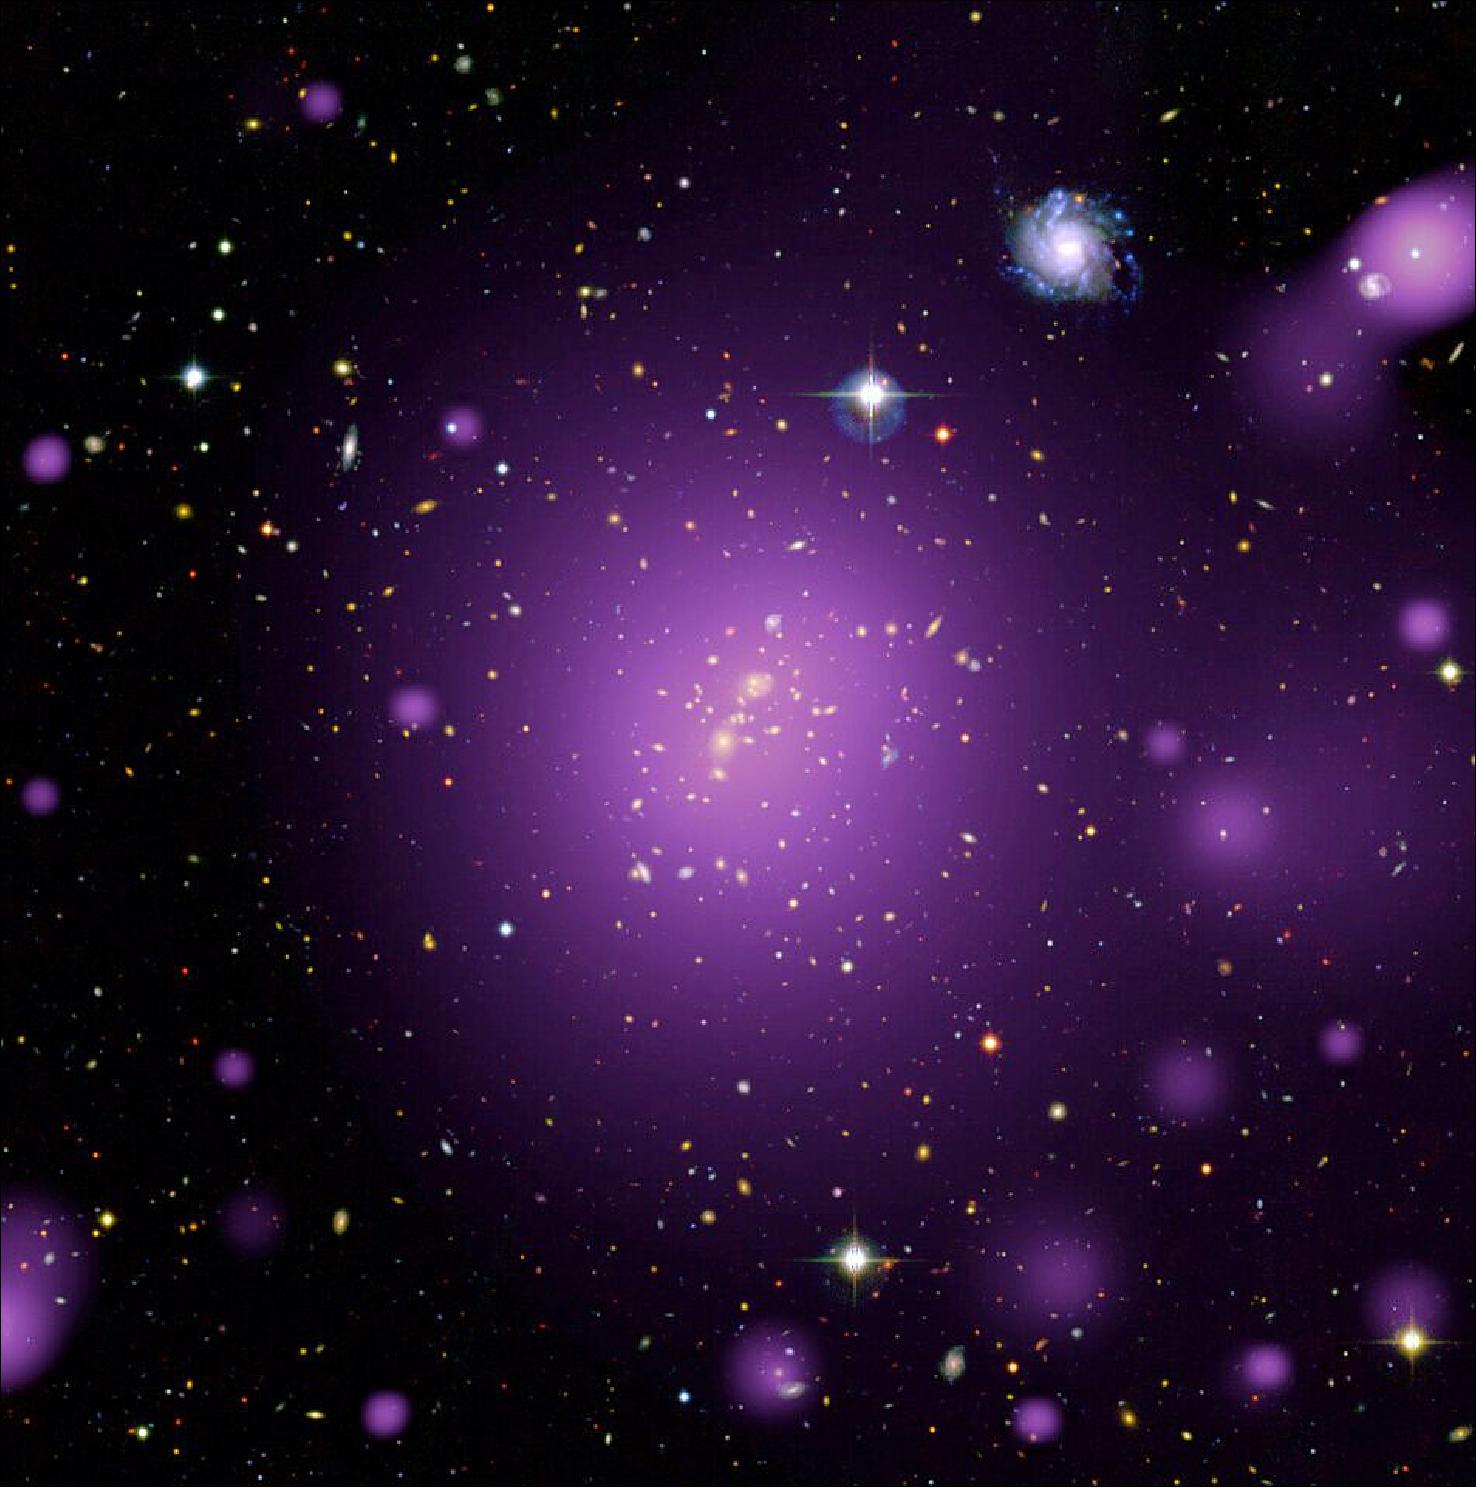 Figure 37: Astronomers using ESA’s XMM-Newton space observatory have captured the X-ray glow (shown here in purple) emitted by the hot gas that pervades the galaxy cluster XLSSC006. The cluster is home to a few hundreds of galaxies, large amounts of diffuse, X-ray bright gas, and even larger amounts of dark matter, with a total mass equivalent to some 500 trillion solar masses. Because of its distance from us, we are seeing this galaxy cluster as it was when the Universe was only about nine billion years old (image credit: ESA/XMM-Newton (X-rays); CFHT-LS (optical); XXL Survey)